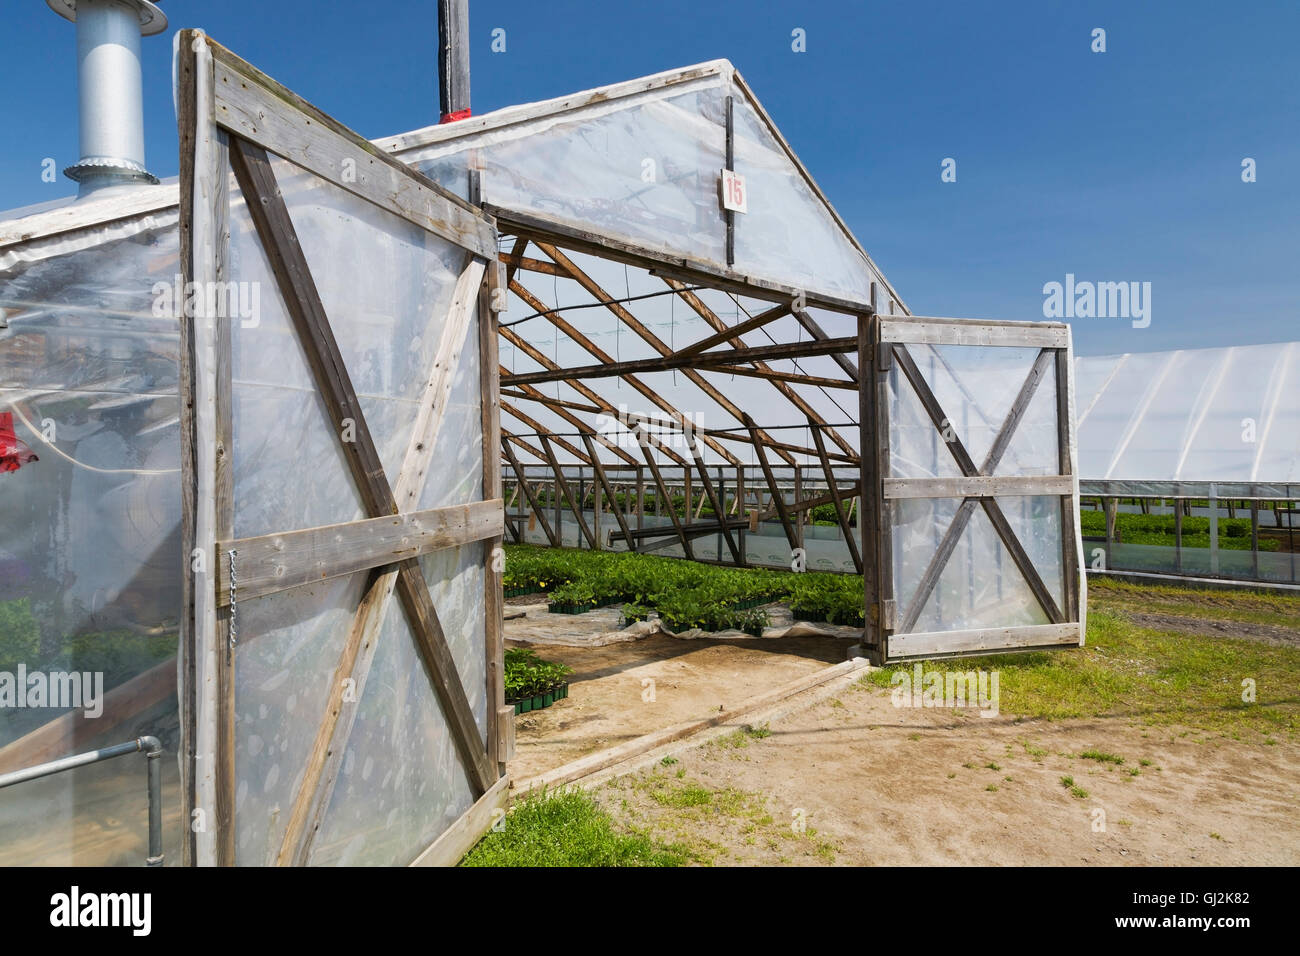 Opened doors on a wooden framed commercial greenhouse with plants being grown in containers Stock Photo